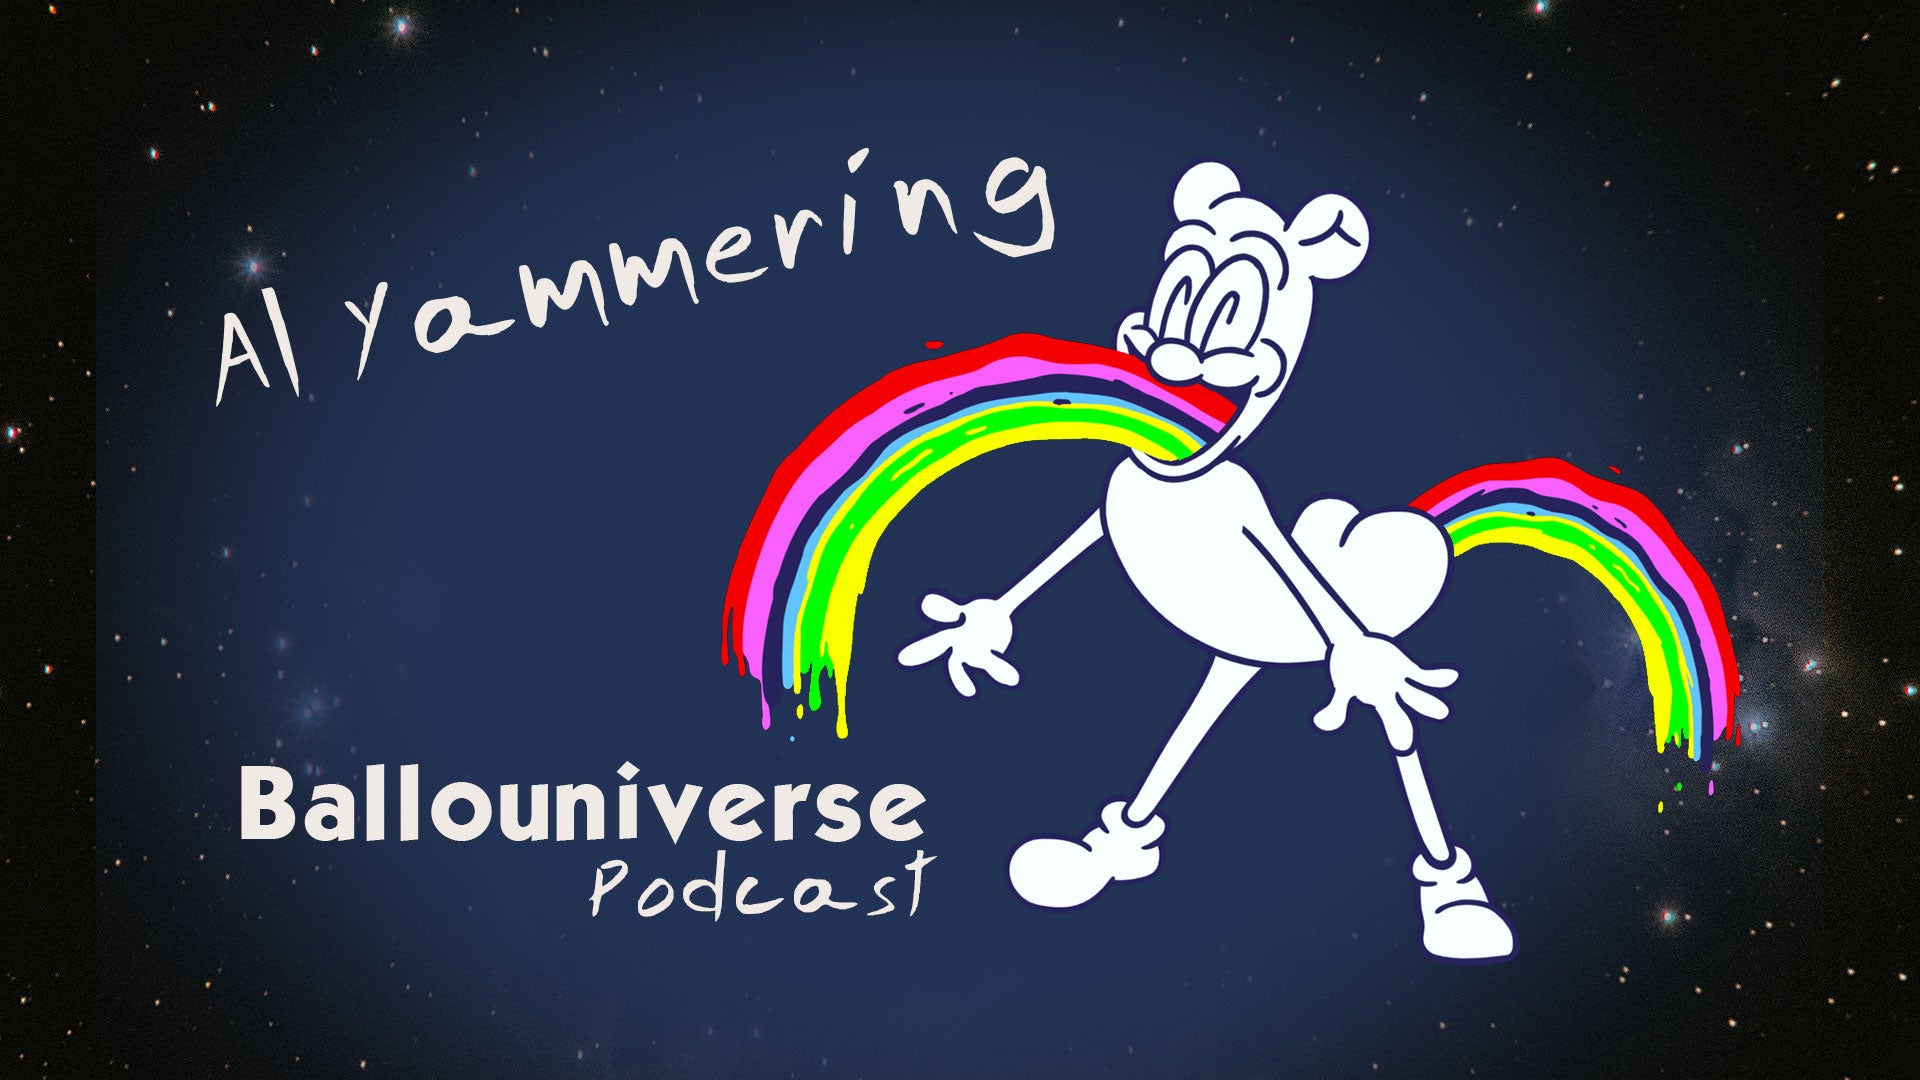 Listen to Al Yammering about Why Rainbows?